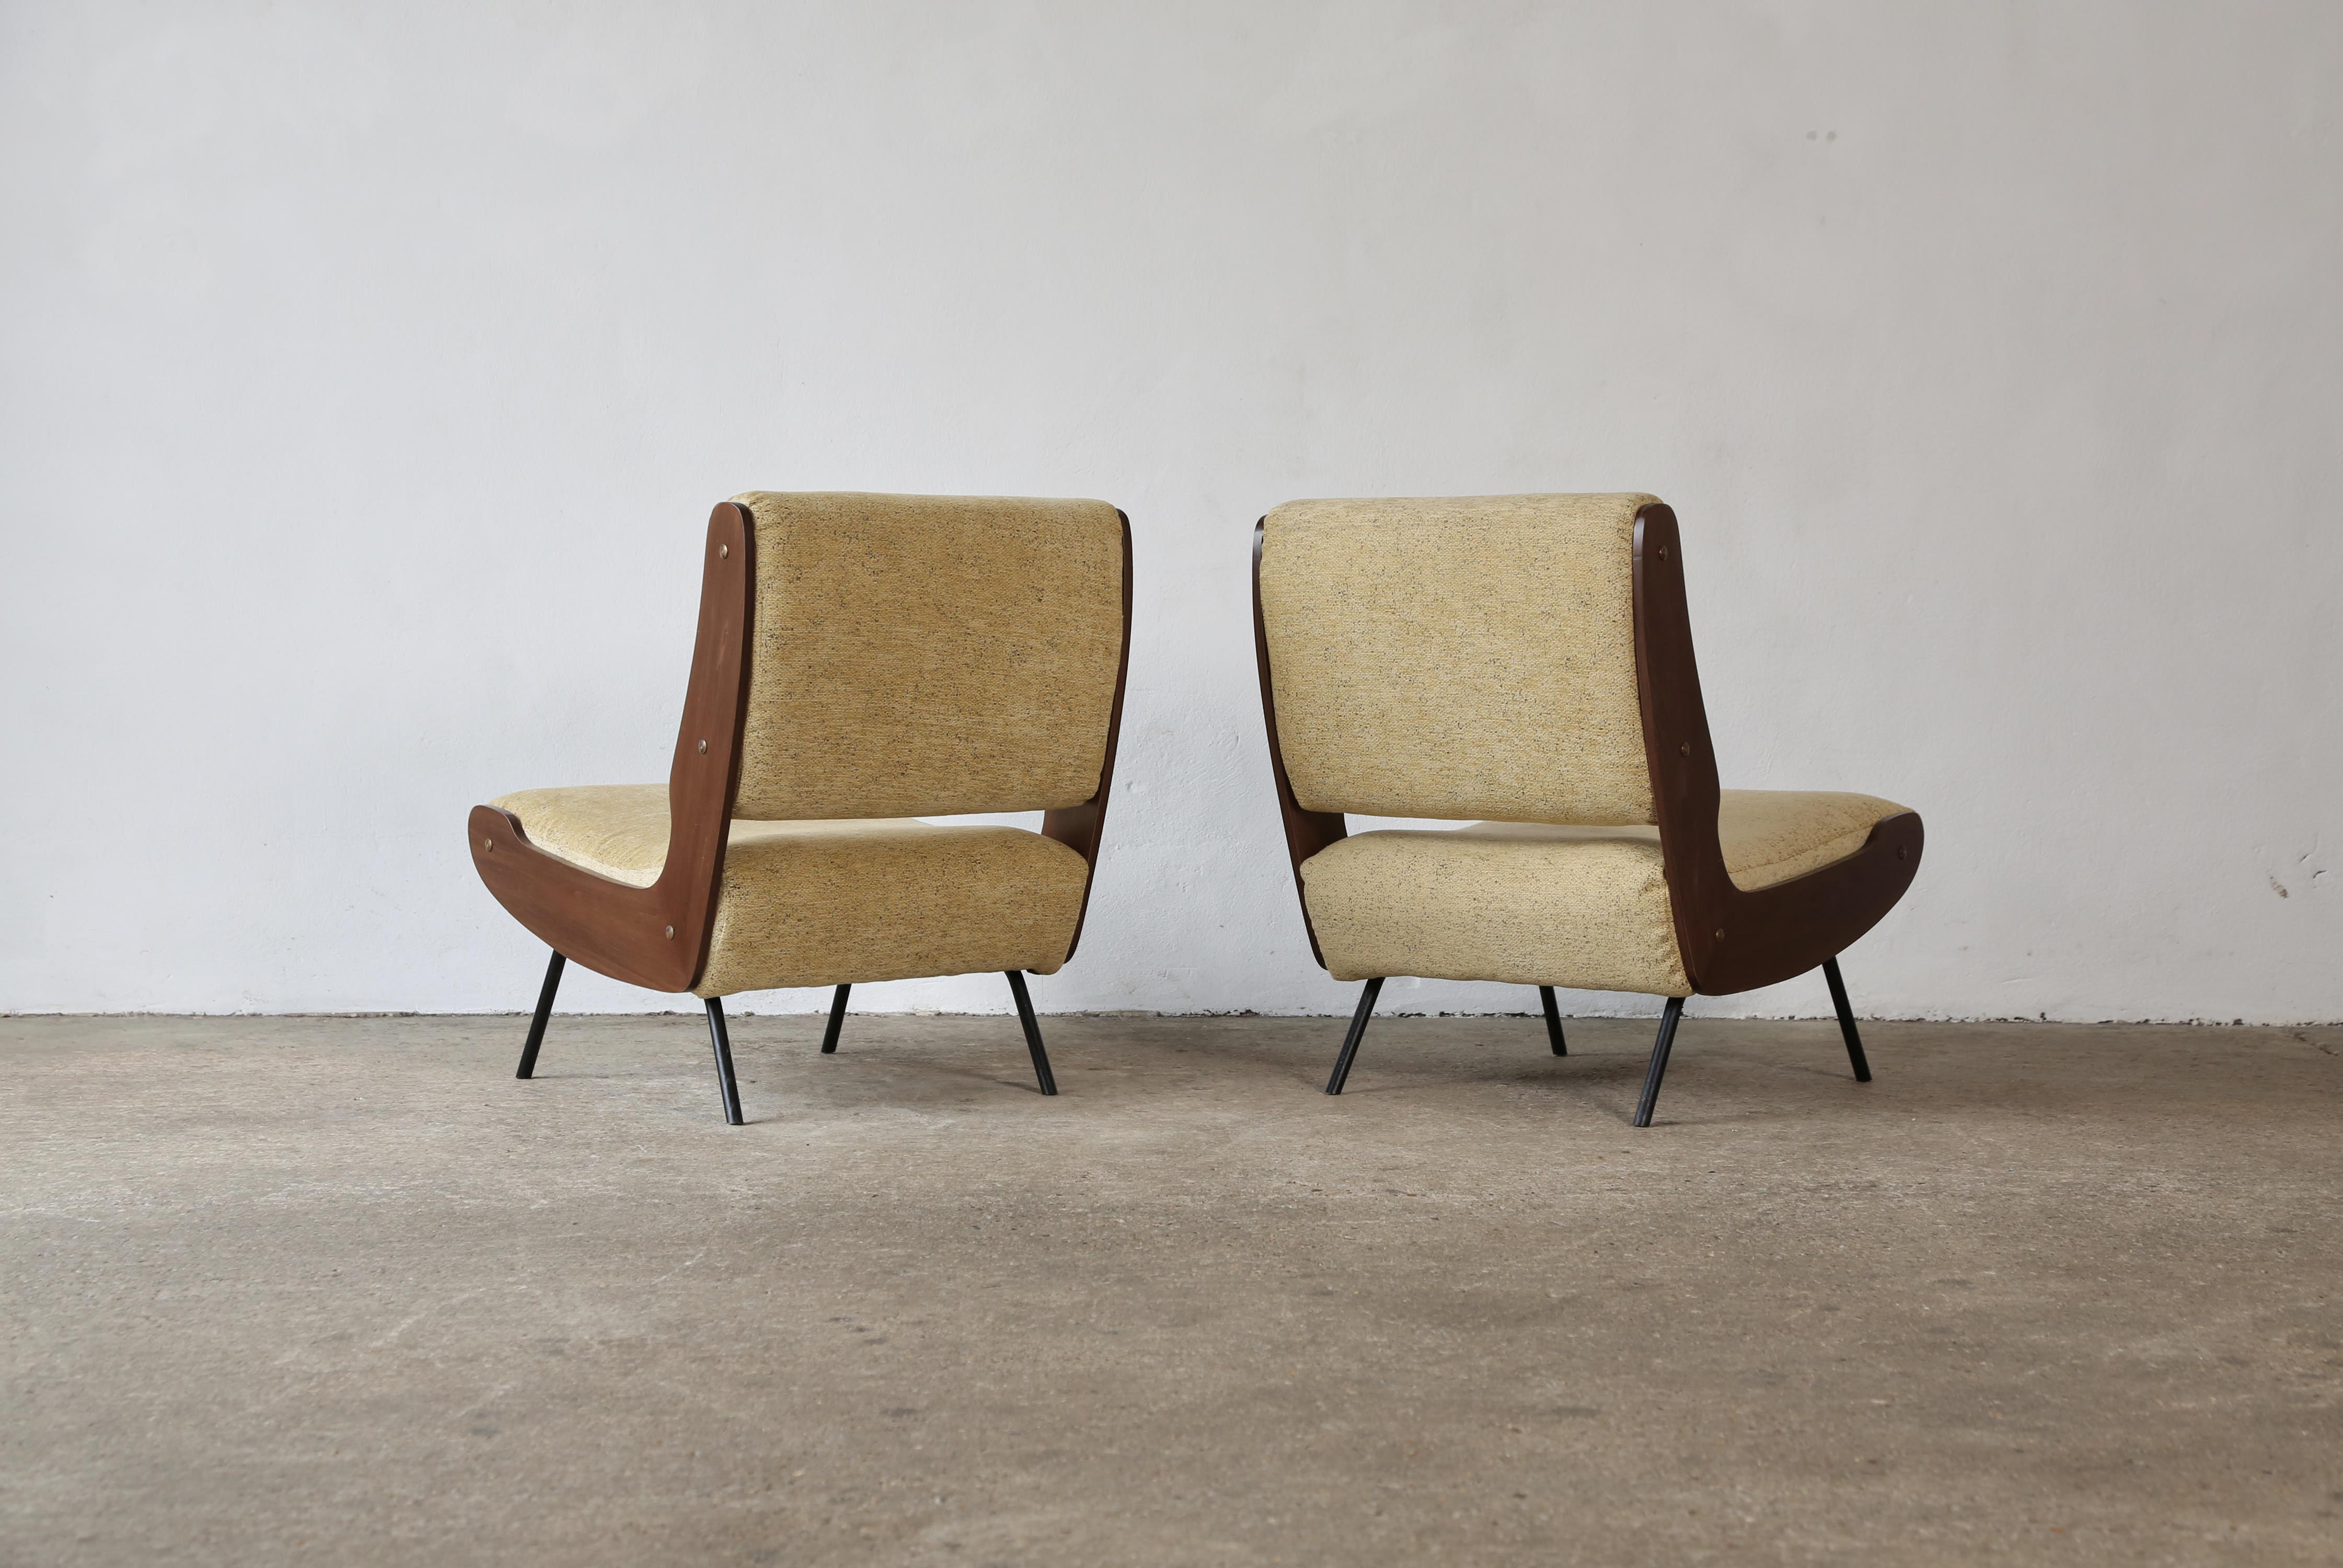 Gianfranco Frattini 836 Lounge Chairs, Cassina, Italy, 1950s For Sale 1